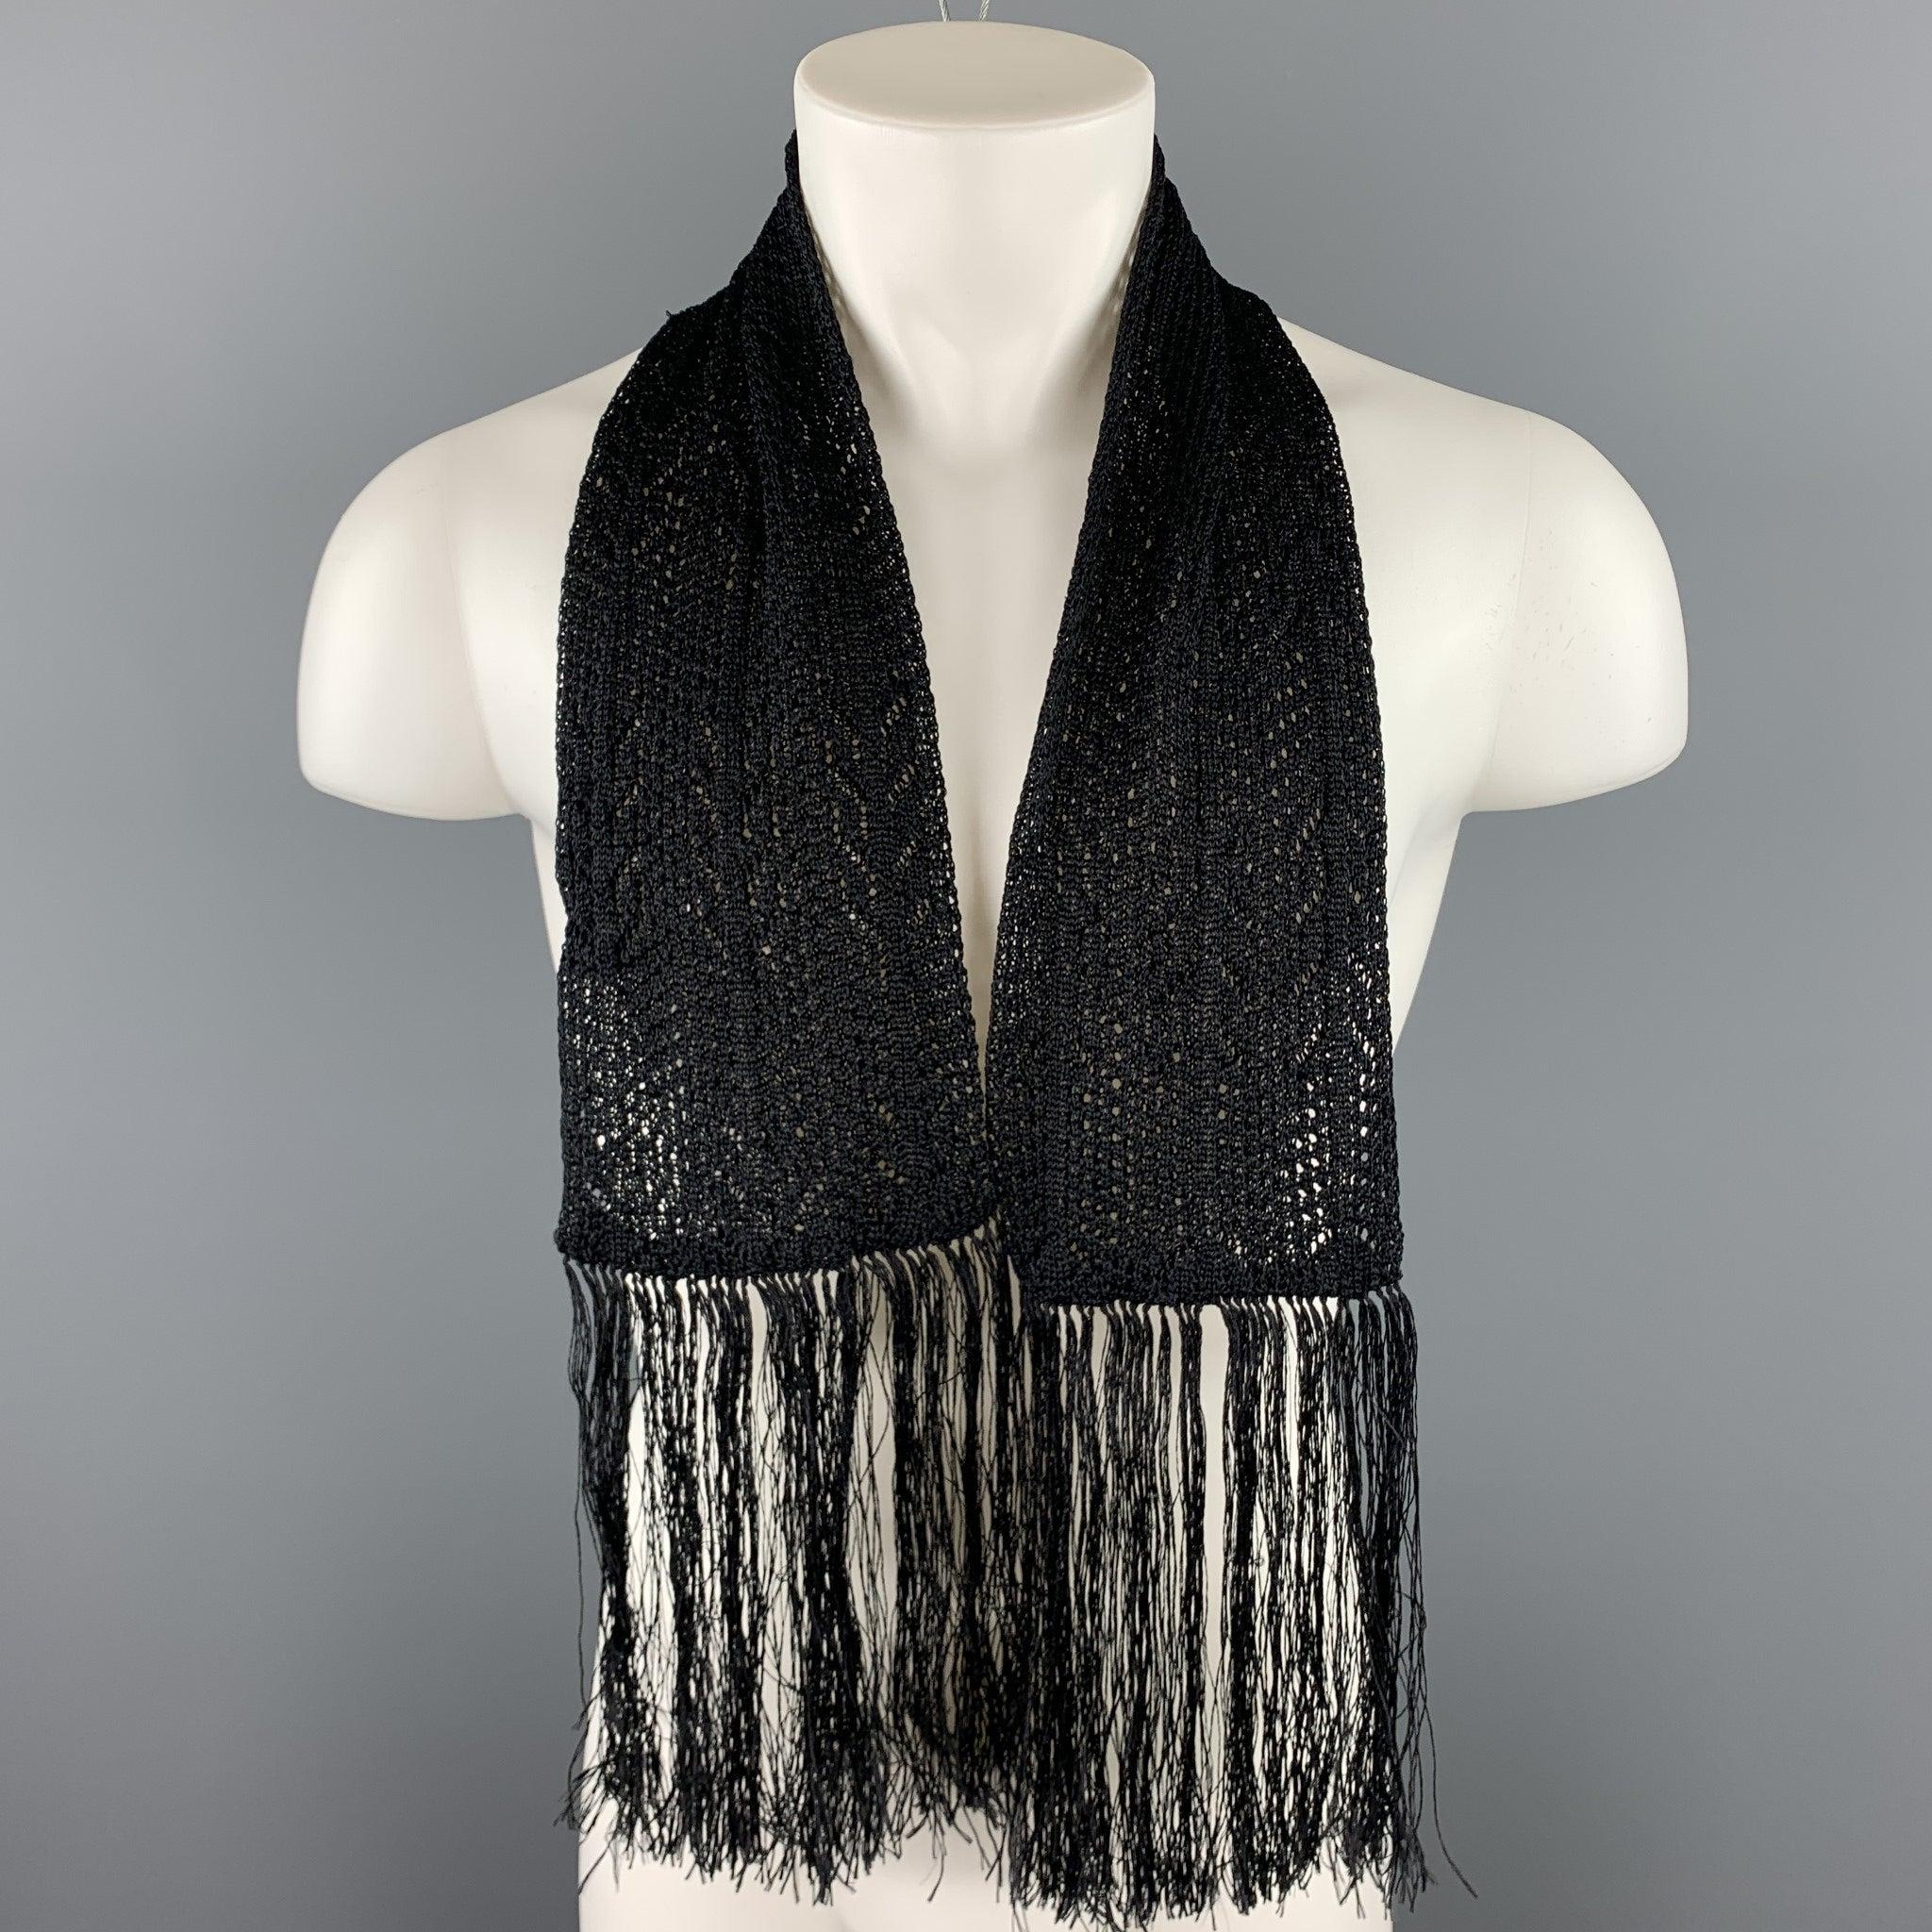 YVES SAINT LAURENT scarf comes in a black knitted silk with a eight inch fringe trim. Made in Italy.Very Good Pre-Owned Condition.
 

Measurements: 
  6 inches  x 48 inches 
  
  
 
Reference: 105121
Category: Scarves
More Details
    
Brand:  YVES